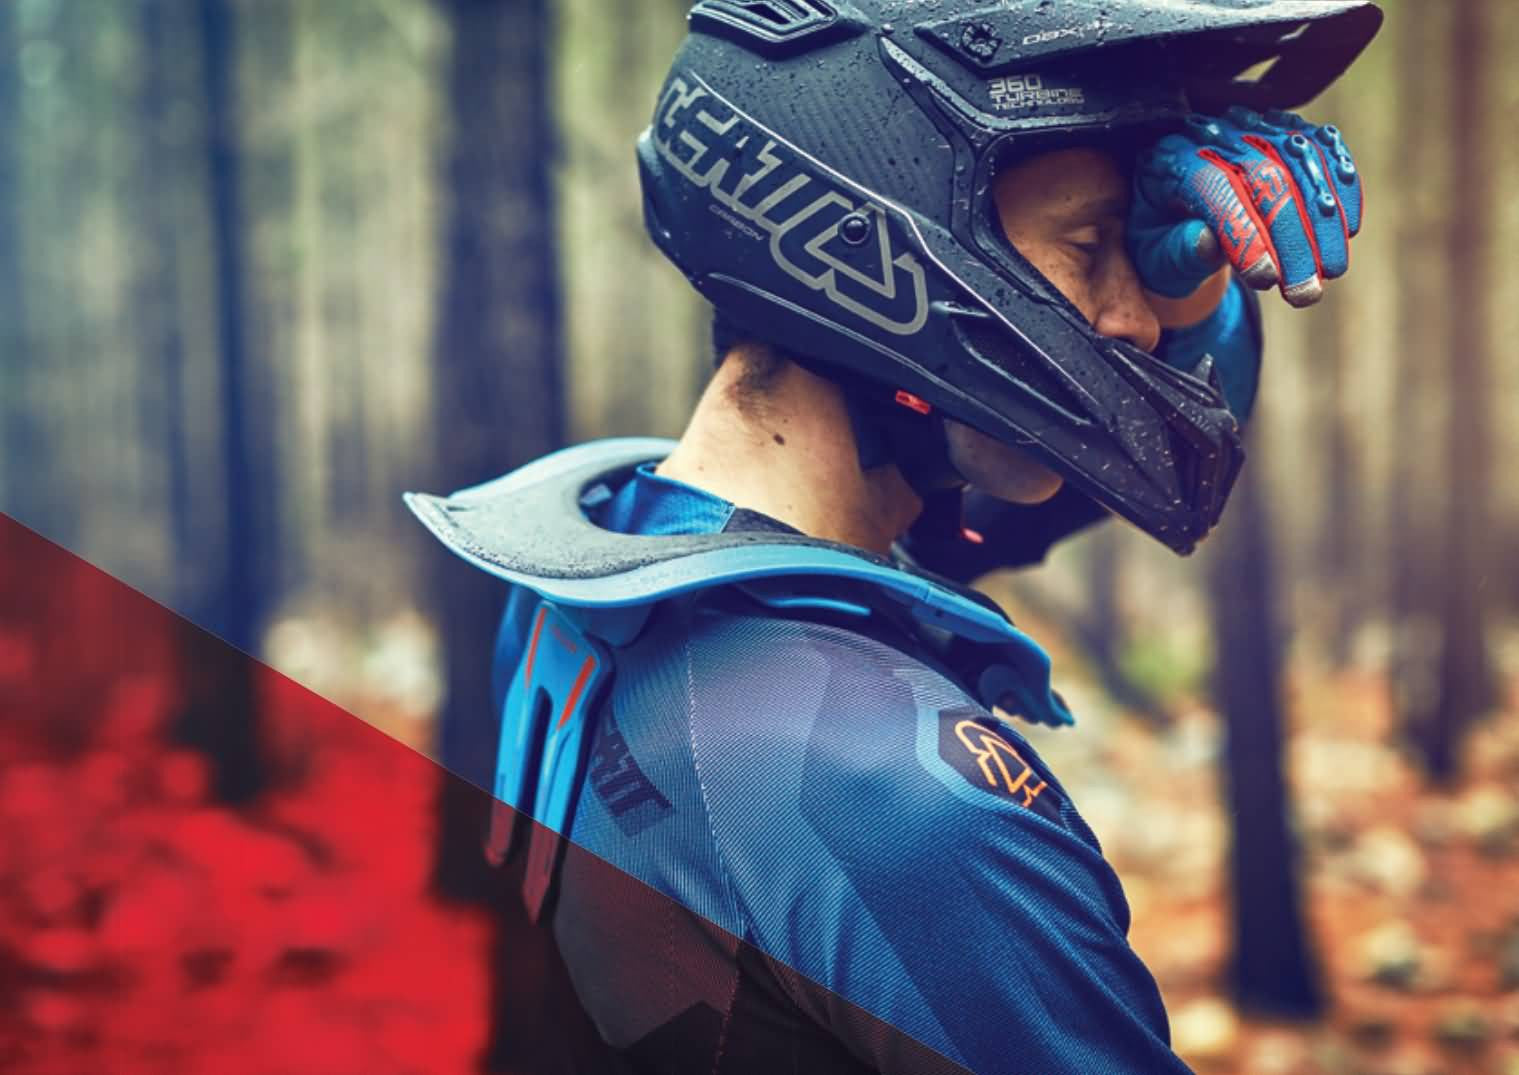 Leatt 2017 | New MTB & MX Offroad Protective Gear Collection